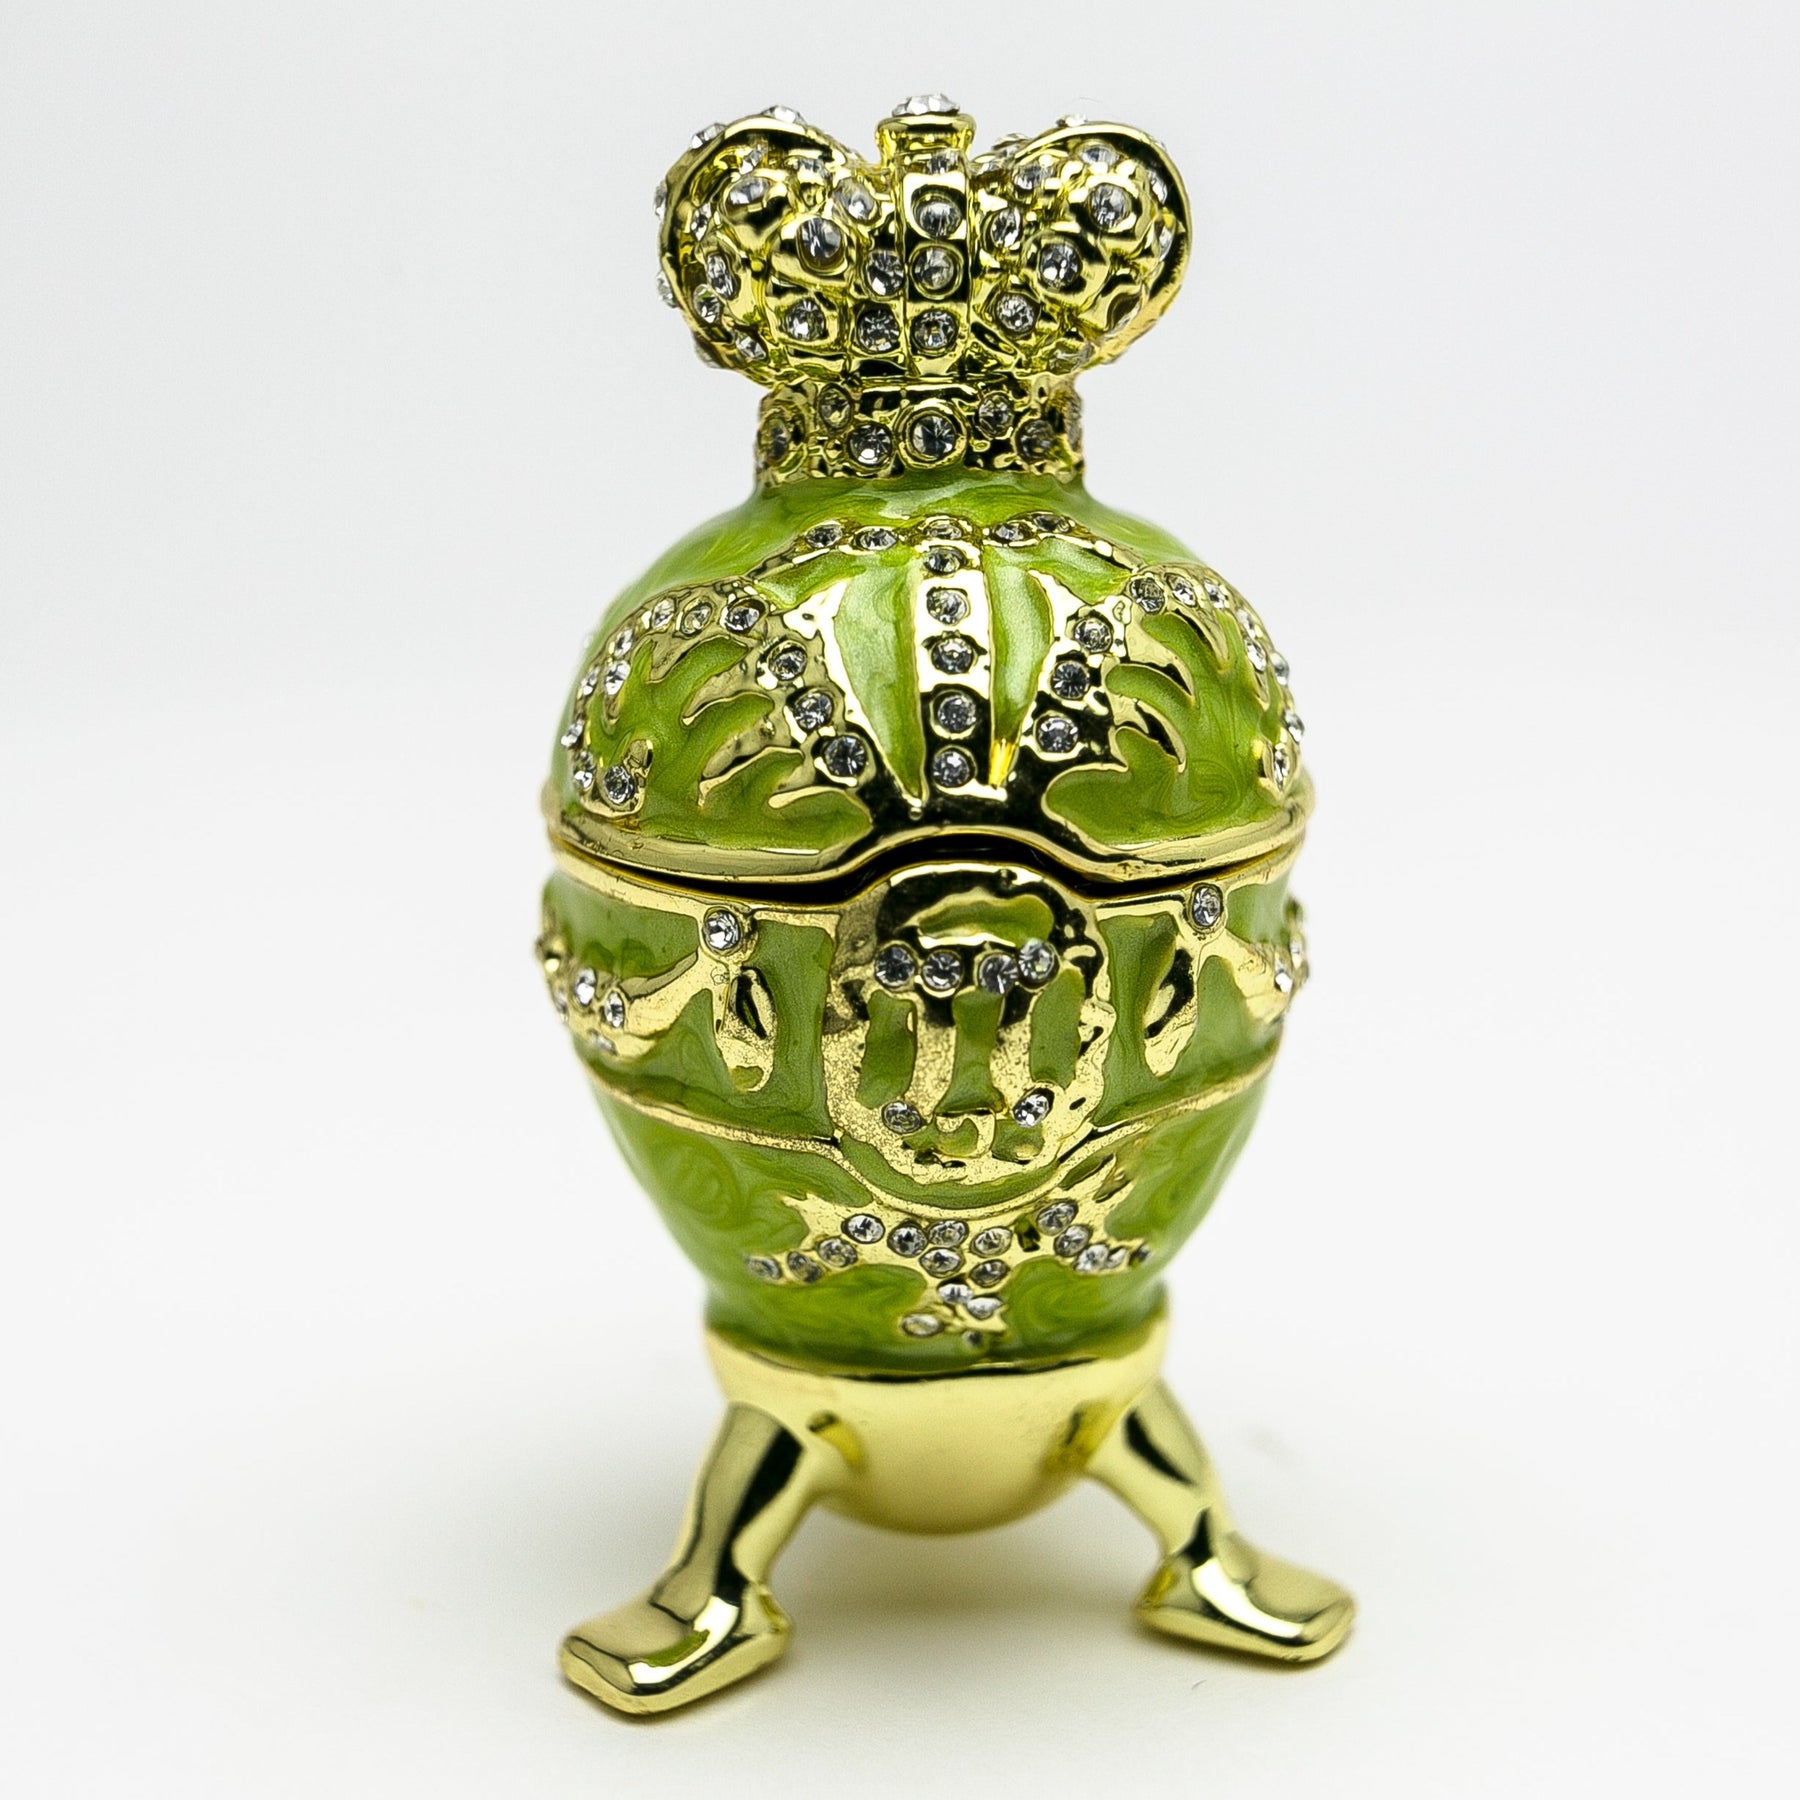 Green Faberge Egg with Heart on Top